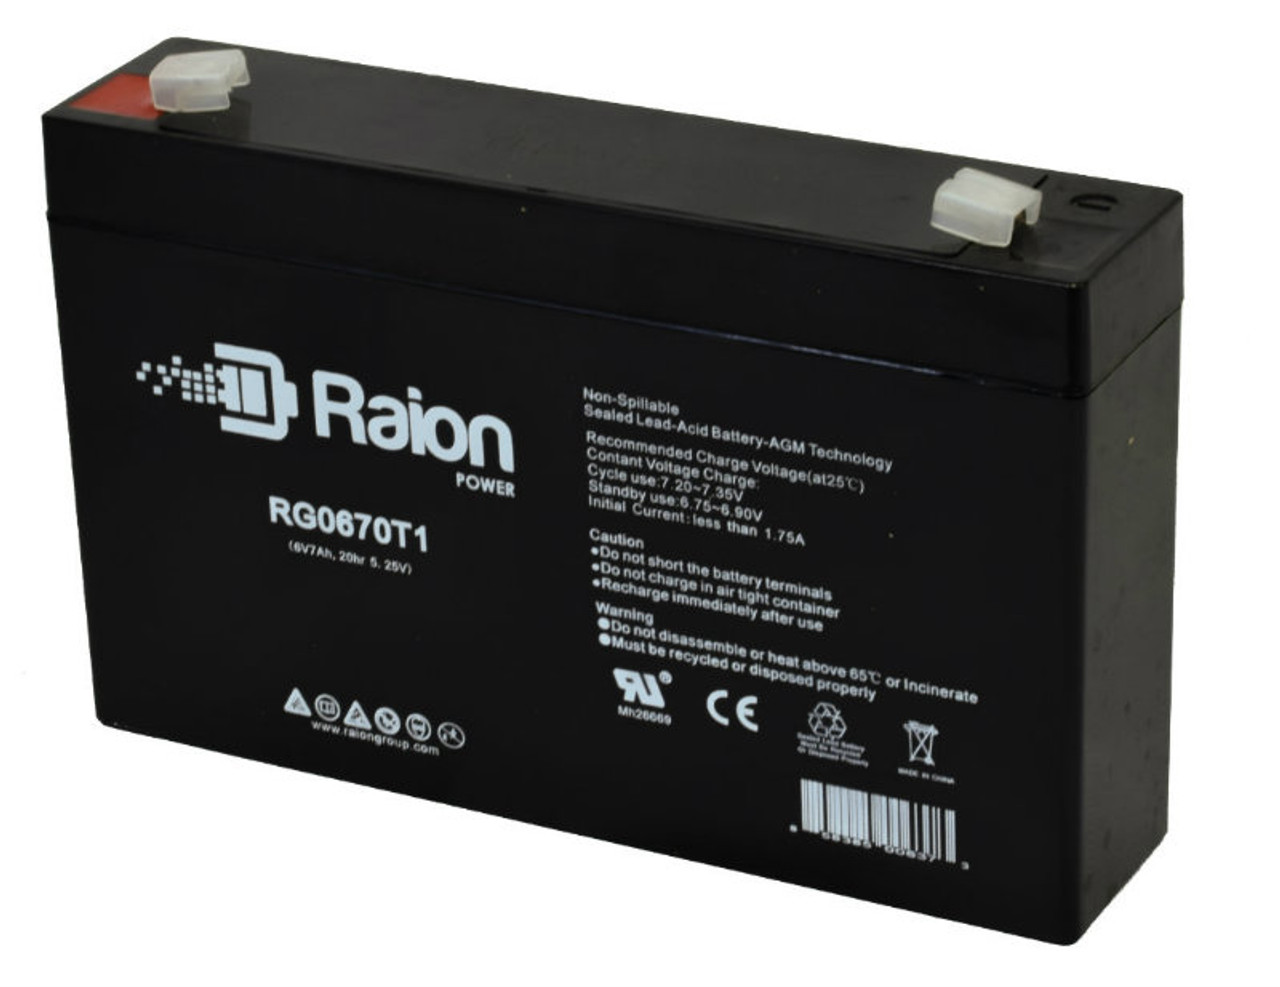 Raion Power RG0670T1 6V 7Ah Replacement Emergency Lighting Battery for National Power Corporation GS016Q4